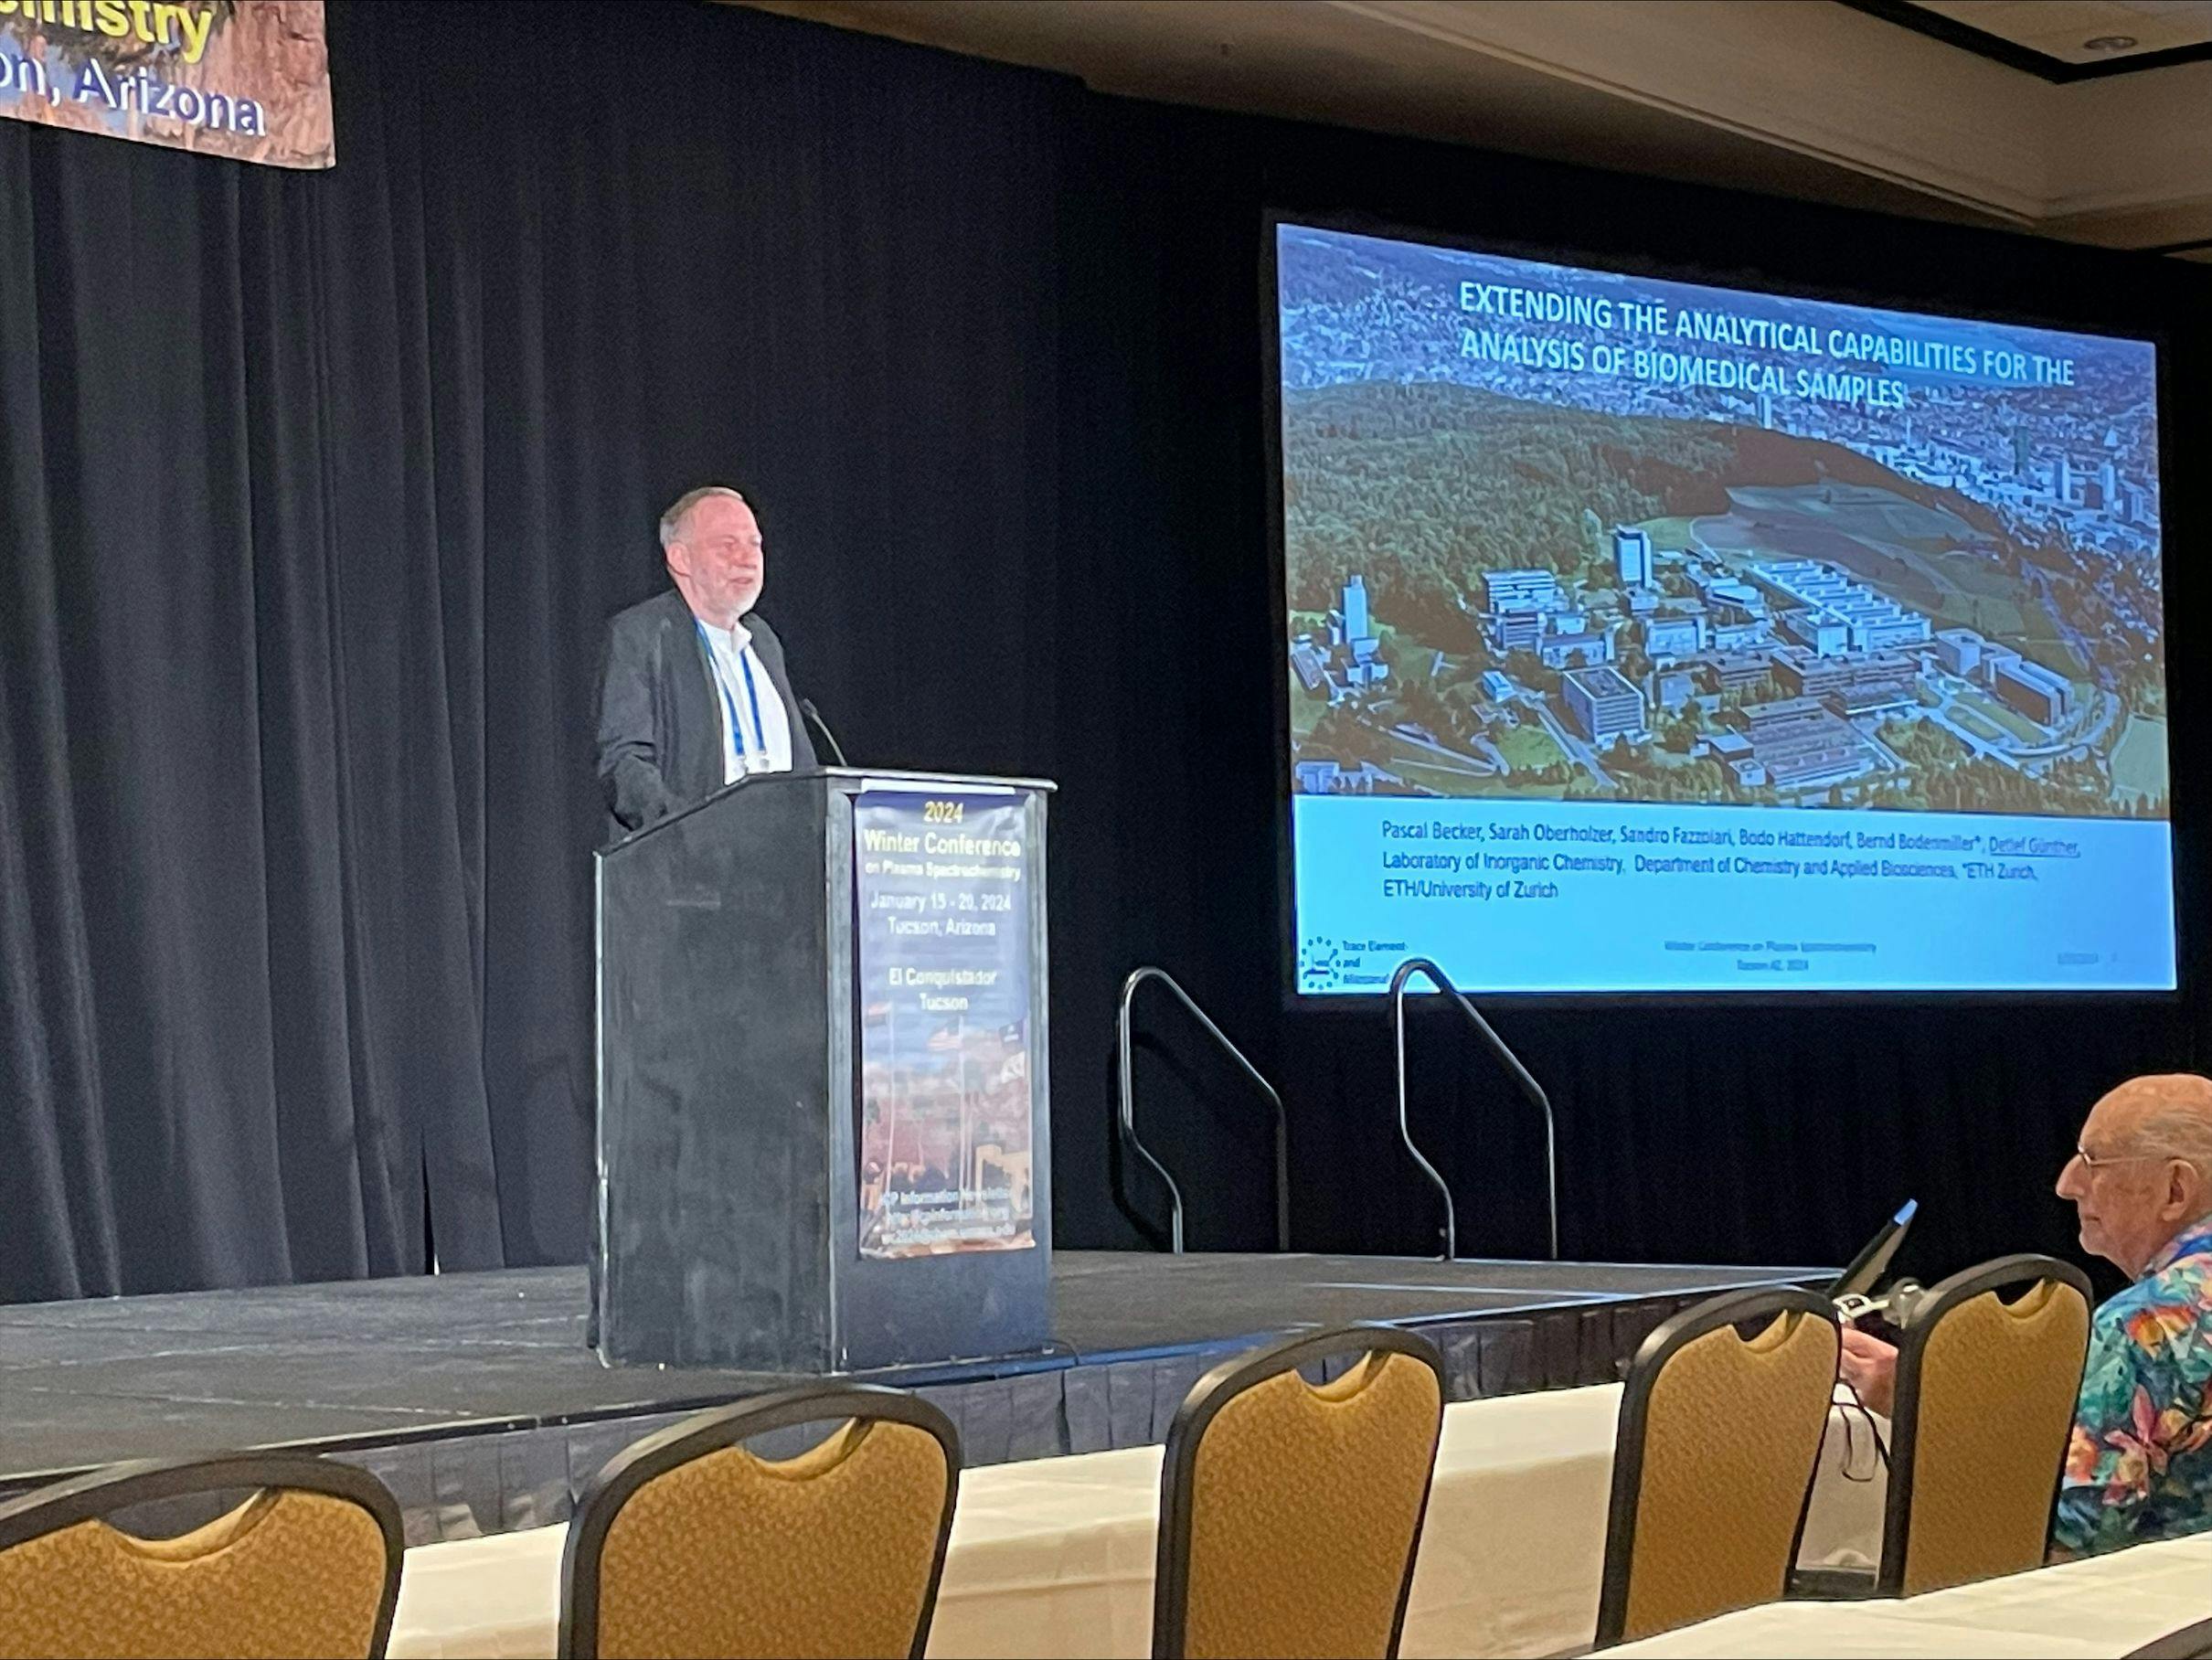 Detlef Günther delivers his talk, “Extending the Analytical Capabilities for the Analysis of Biomedical Samples,” at the Winter Conference of Plasma Spectrochemistry, in Tucson, Arizona. Photo Credit: © Will Wetzel